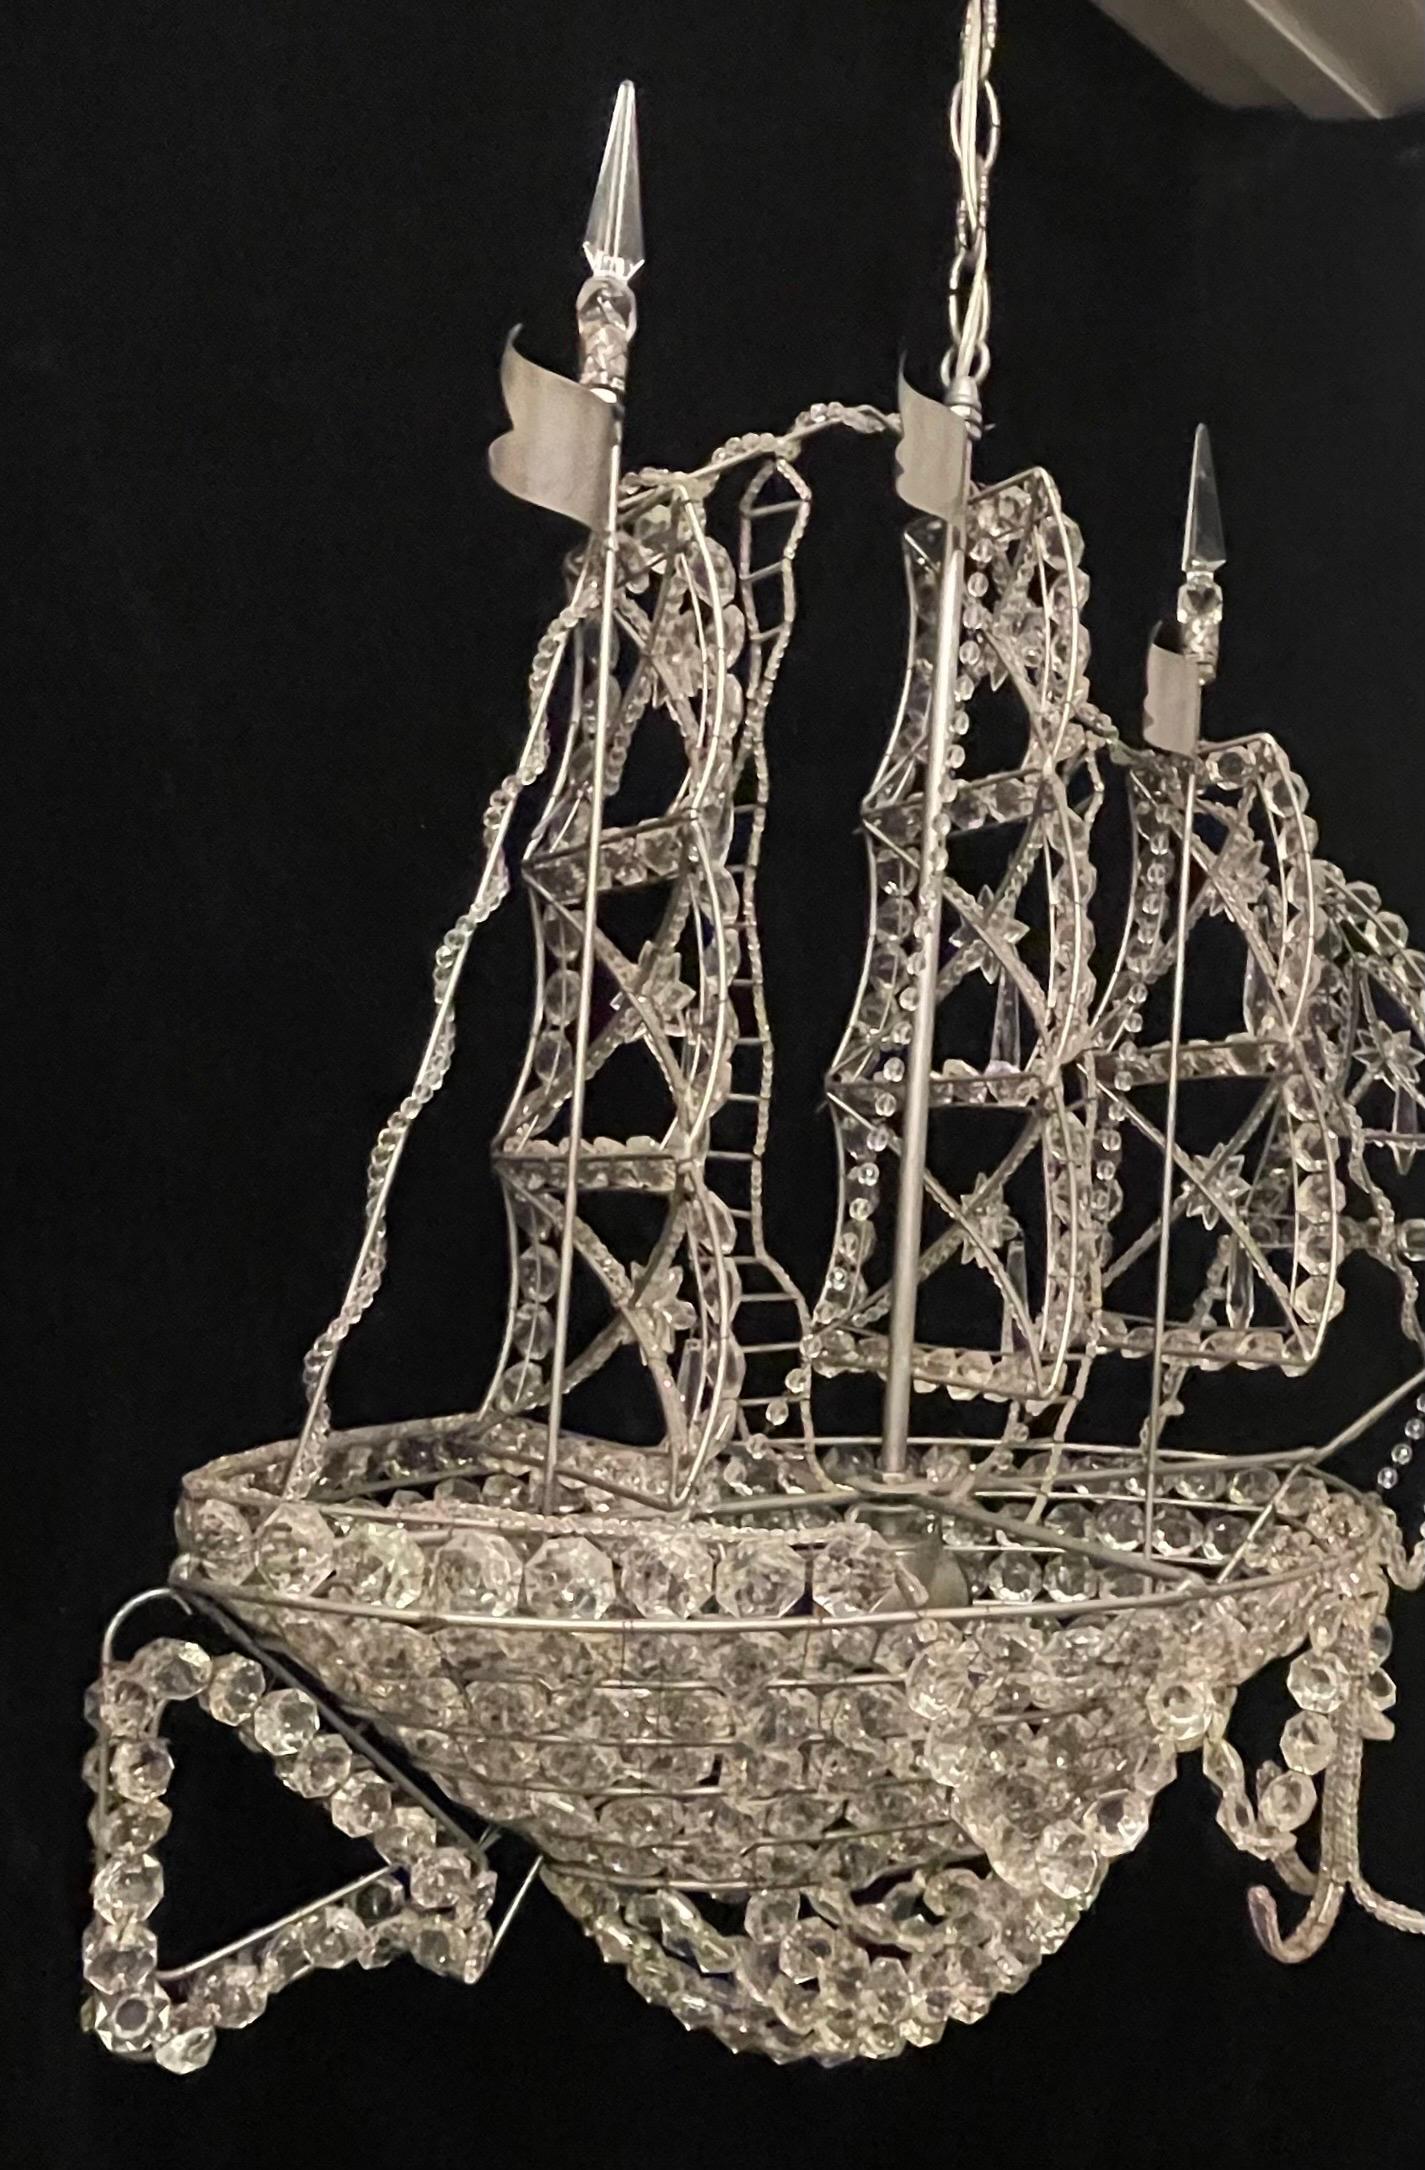 Hand-Crafted Beautiful Vintage Large Italian Crystal Beaded Gilt Boat Chandelier Ship Fixture For Sale